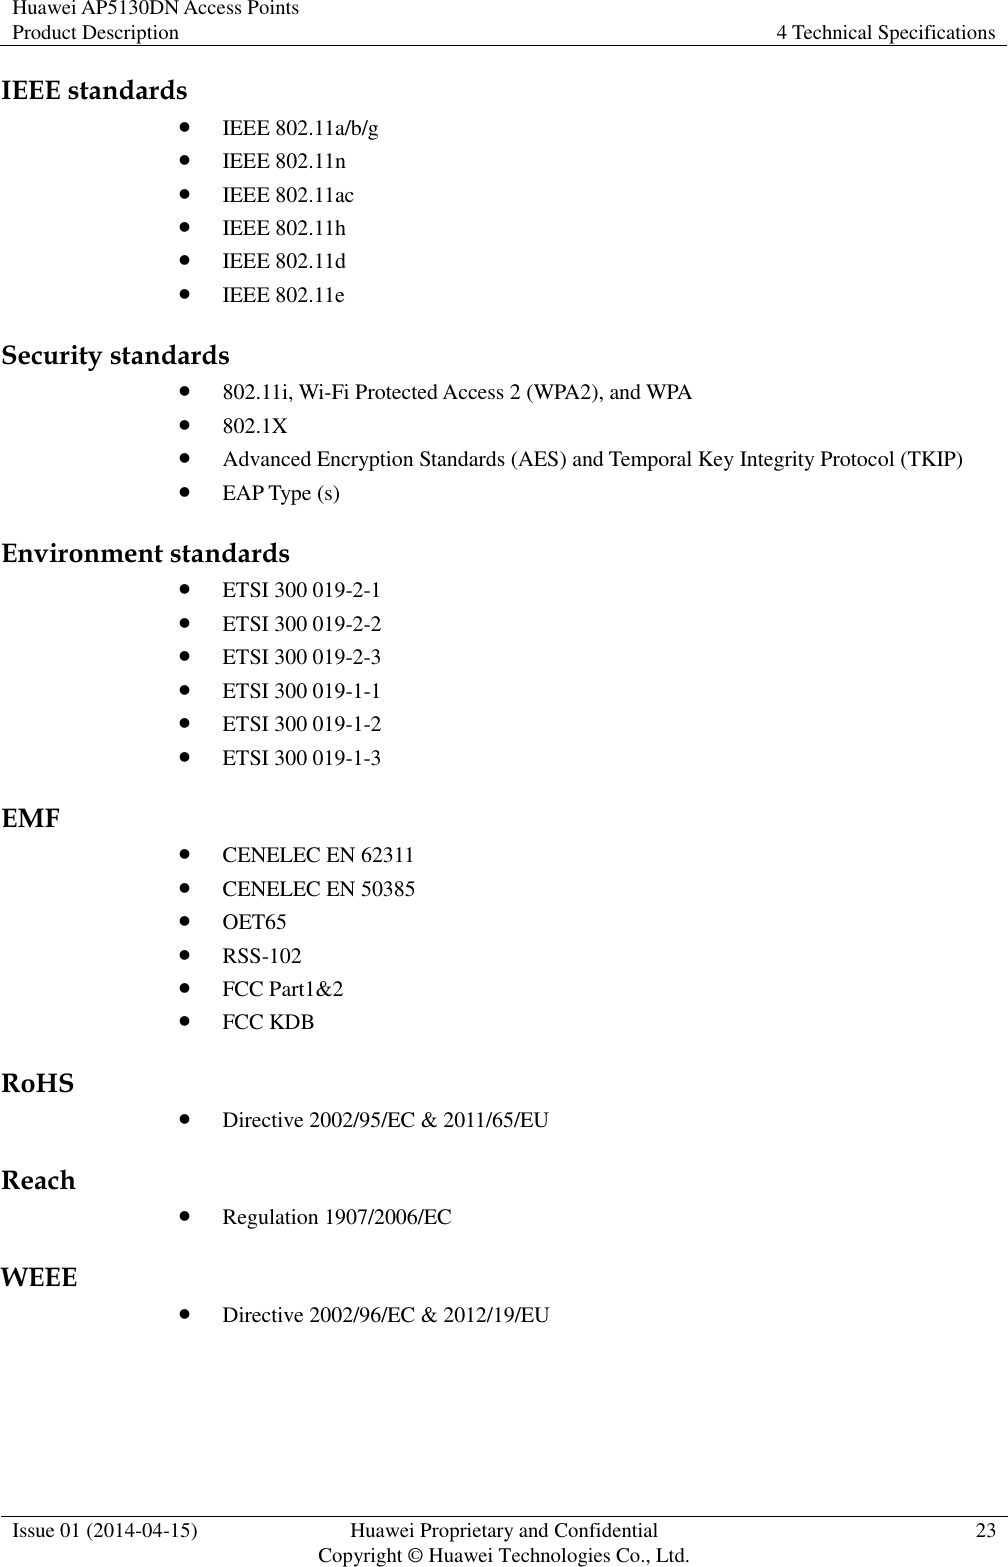 Huawei AP5130DN Access Points Product Description 4 Technical Specifications  Issue 01 (2014-04-15) Huawei Proprietary and Confidential                                     Copyright © Huawei Technologies Co., Ltd. 23  IEEE standards  IEEE 802.11a/b/g  IEEE 802.11n  IEEE 802.11ac  IEEE 802.11h  IEEE 802.11d  IEEE 802.11e Security standards  802.11i, Wi-Fi Protected Access 2 (WPA2), and WPA  802.1X  Advanced Encryption Standards (AES) and Temporal Key Integrity Protocol (TKIP)  EAP Type (s) Environment standards  ETSI 300 019-2-1  ETSI 300 019-2-2  ETSI 300 019-2-3  ETSI 300 019-1-1  ETSI 300 019-1-2  ETSI 300 019-1-3 EMF  CENELEC EN 62311  CENELEC EN 50385  OET65  RSS-102  FCC Part1&amp;2  FCC KDB RoHS  Directive 2002/95/EC &amp; 2011/65/EU Reach  Regulation 1907/2006/EC WEEE  Directive 2002/96/EC &amp; 2012/19/EU 